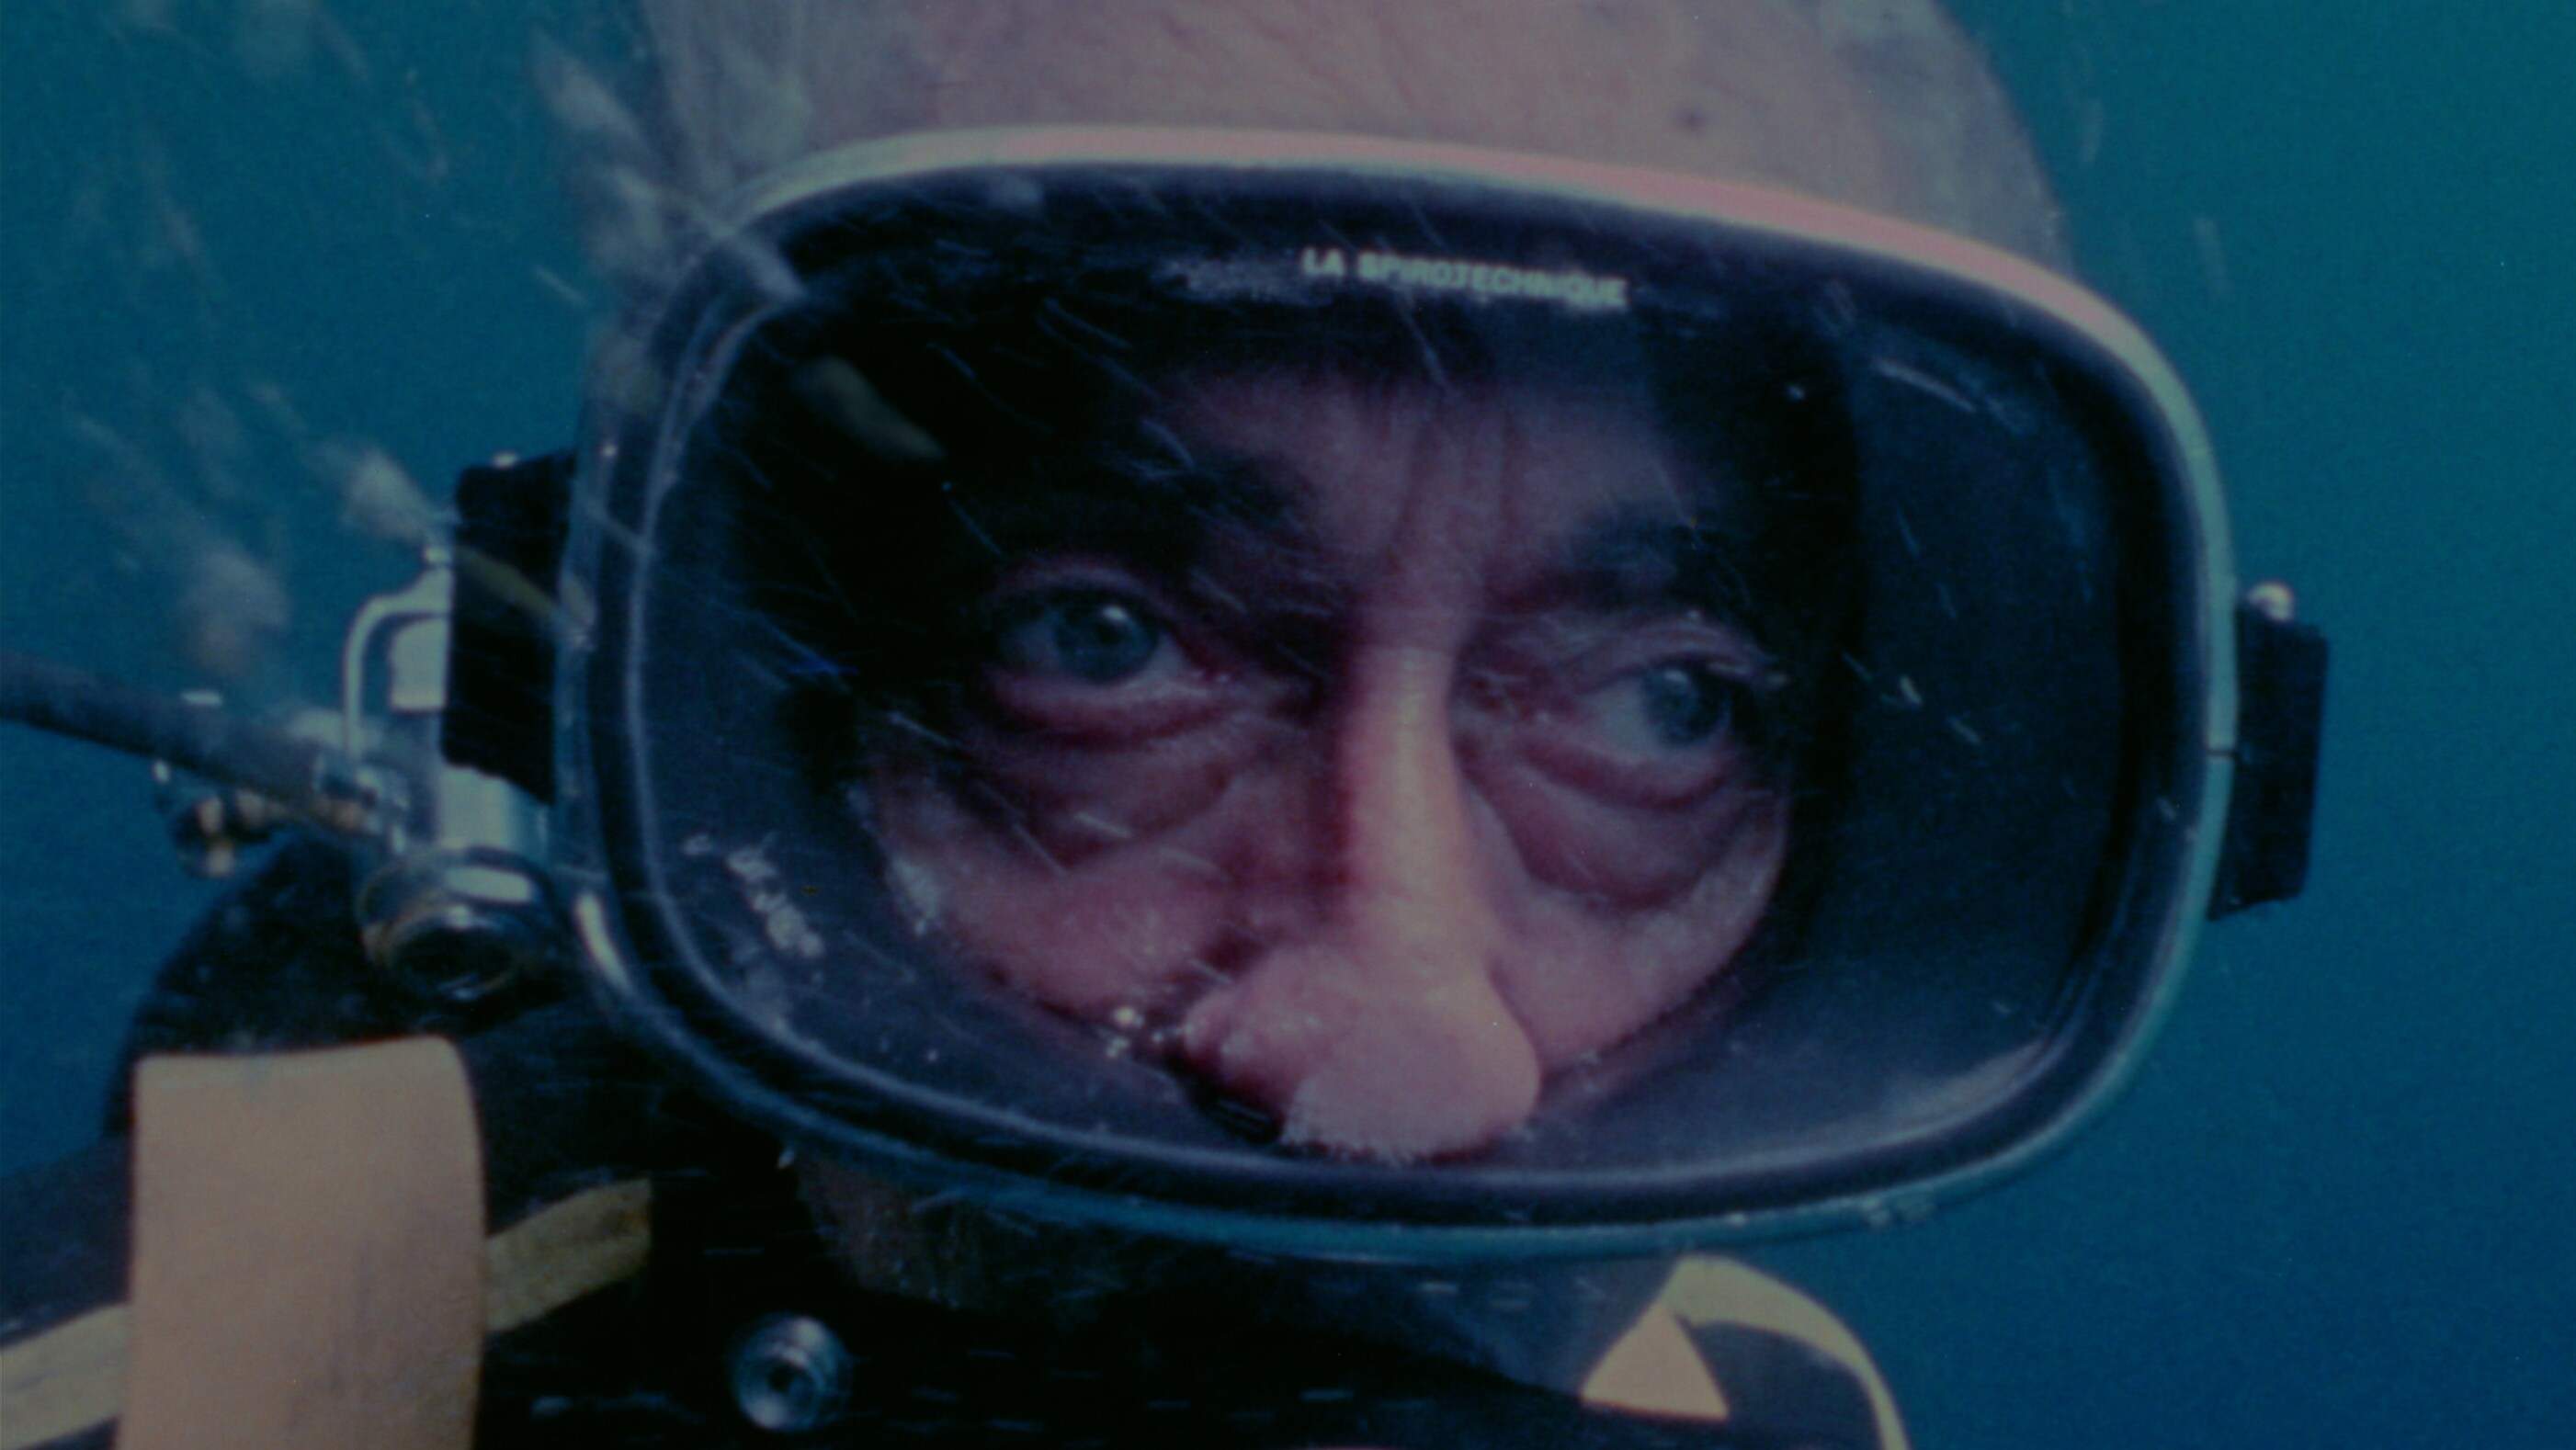 Jacques Cousteau during a 1970 dive. (Credit: The Cousteau Society)